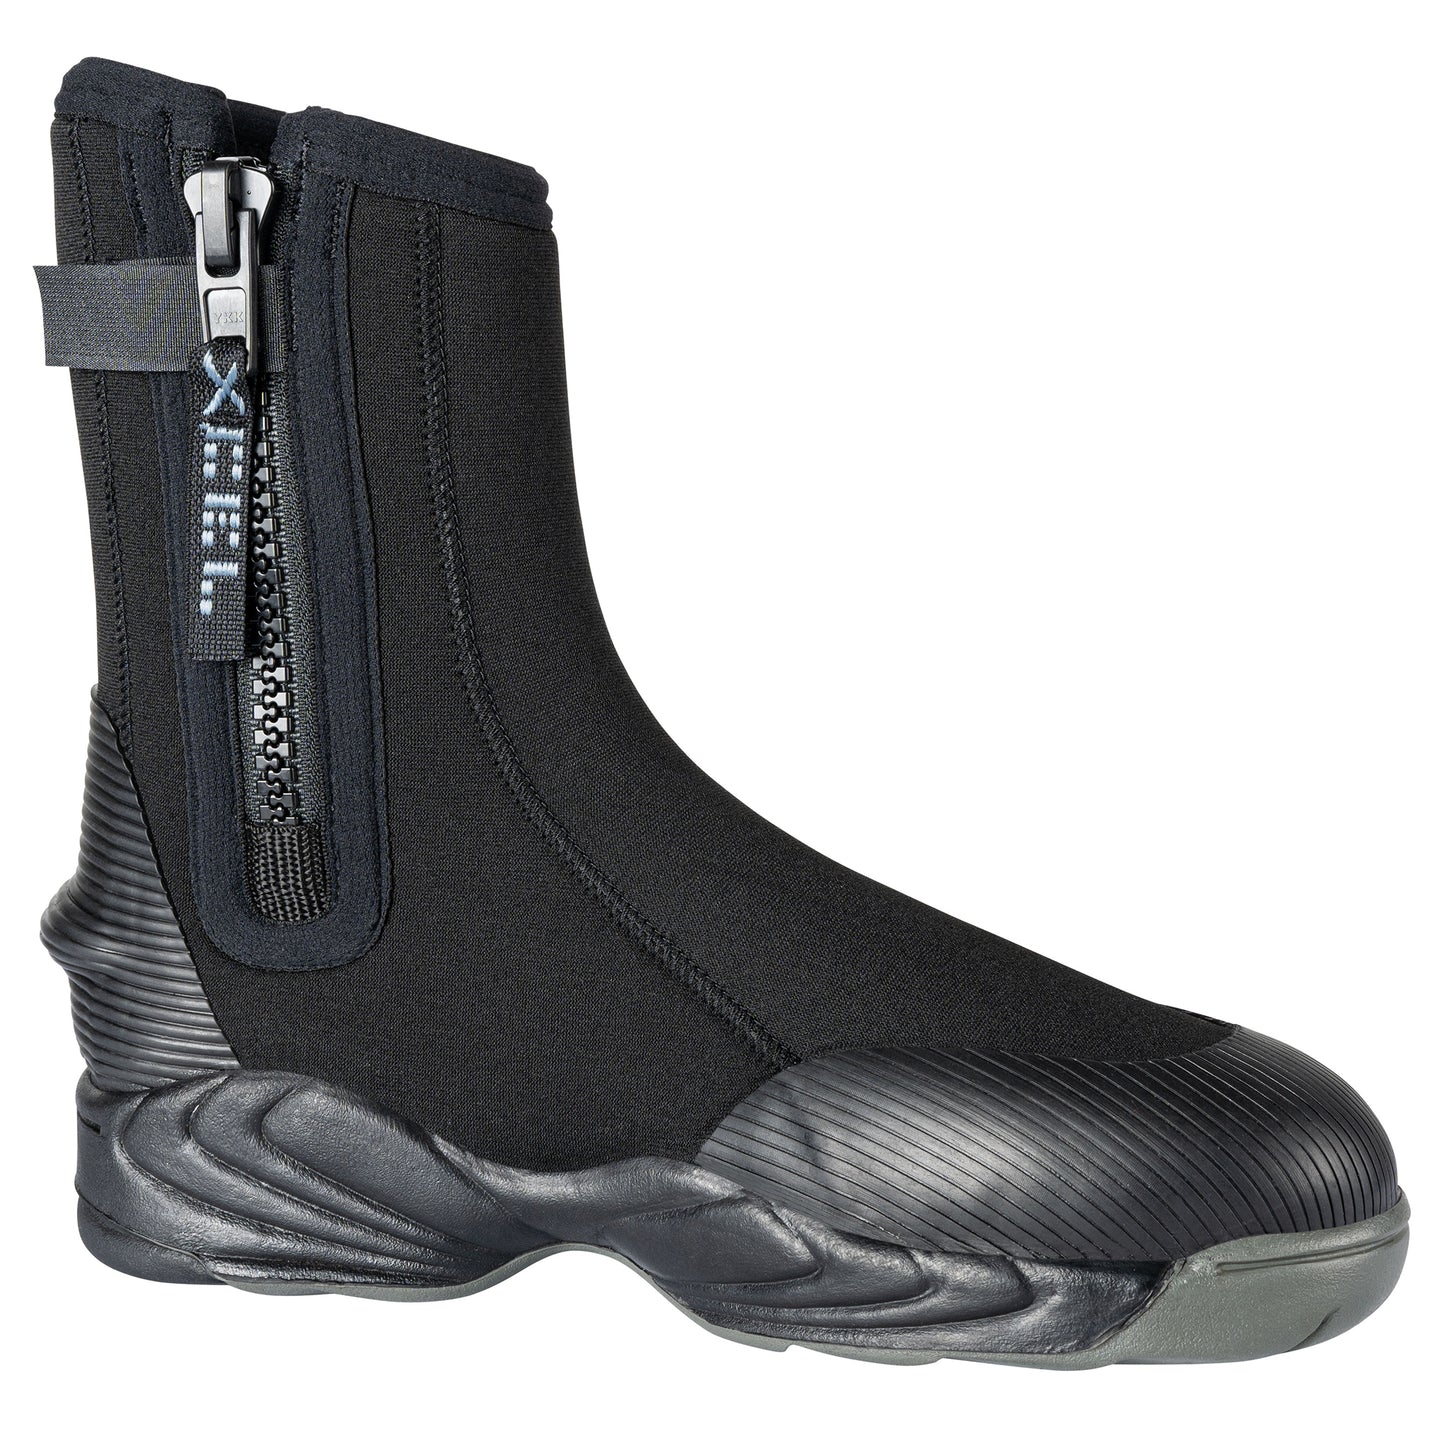 Mens Thermoflex Molded Sole Dive Boot 7mm